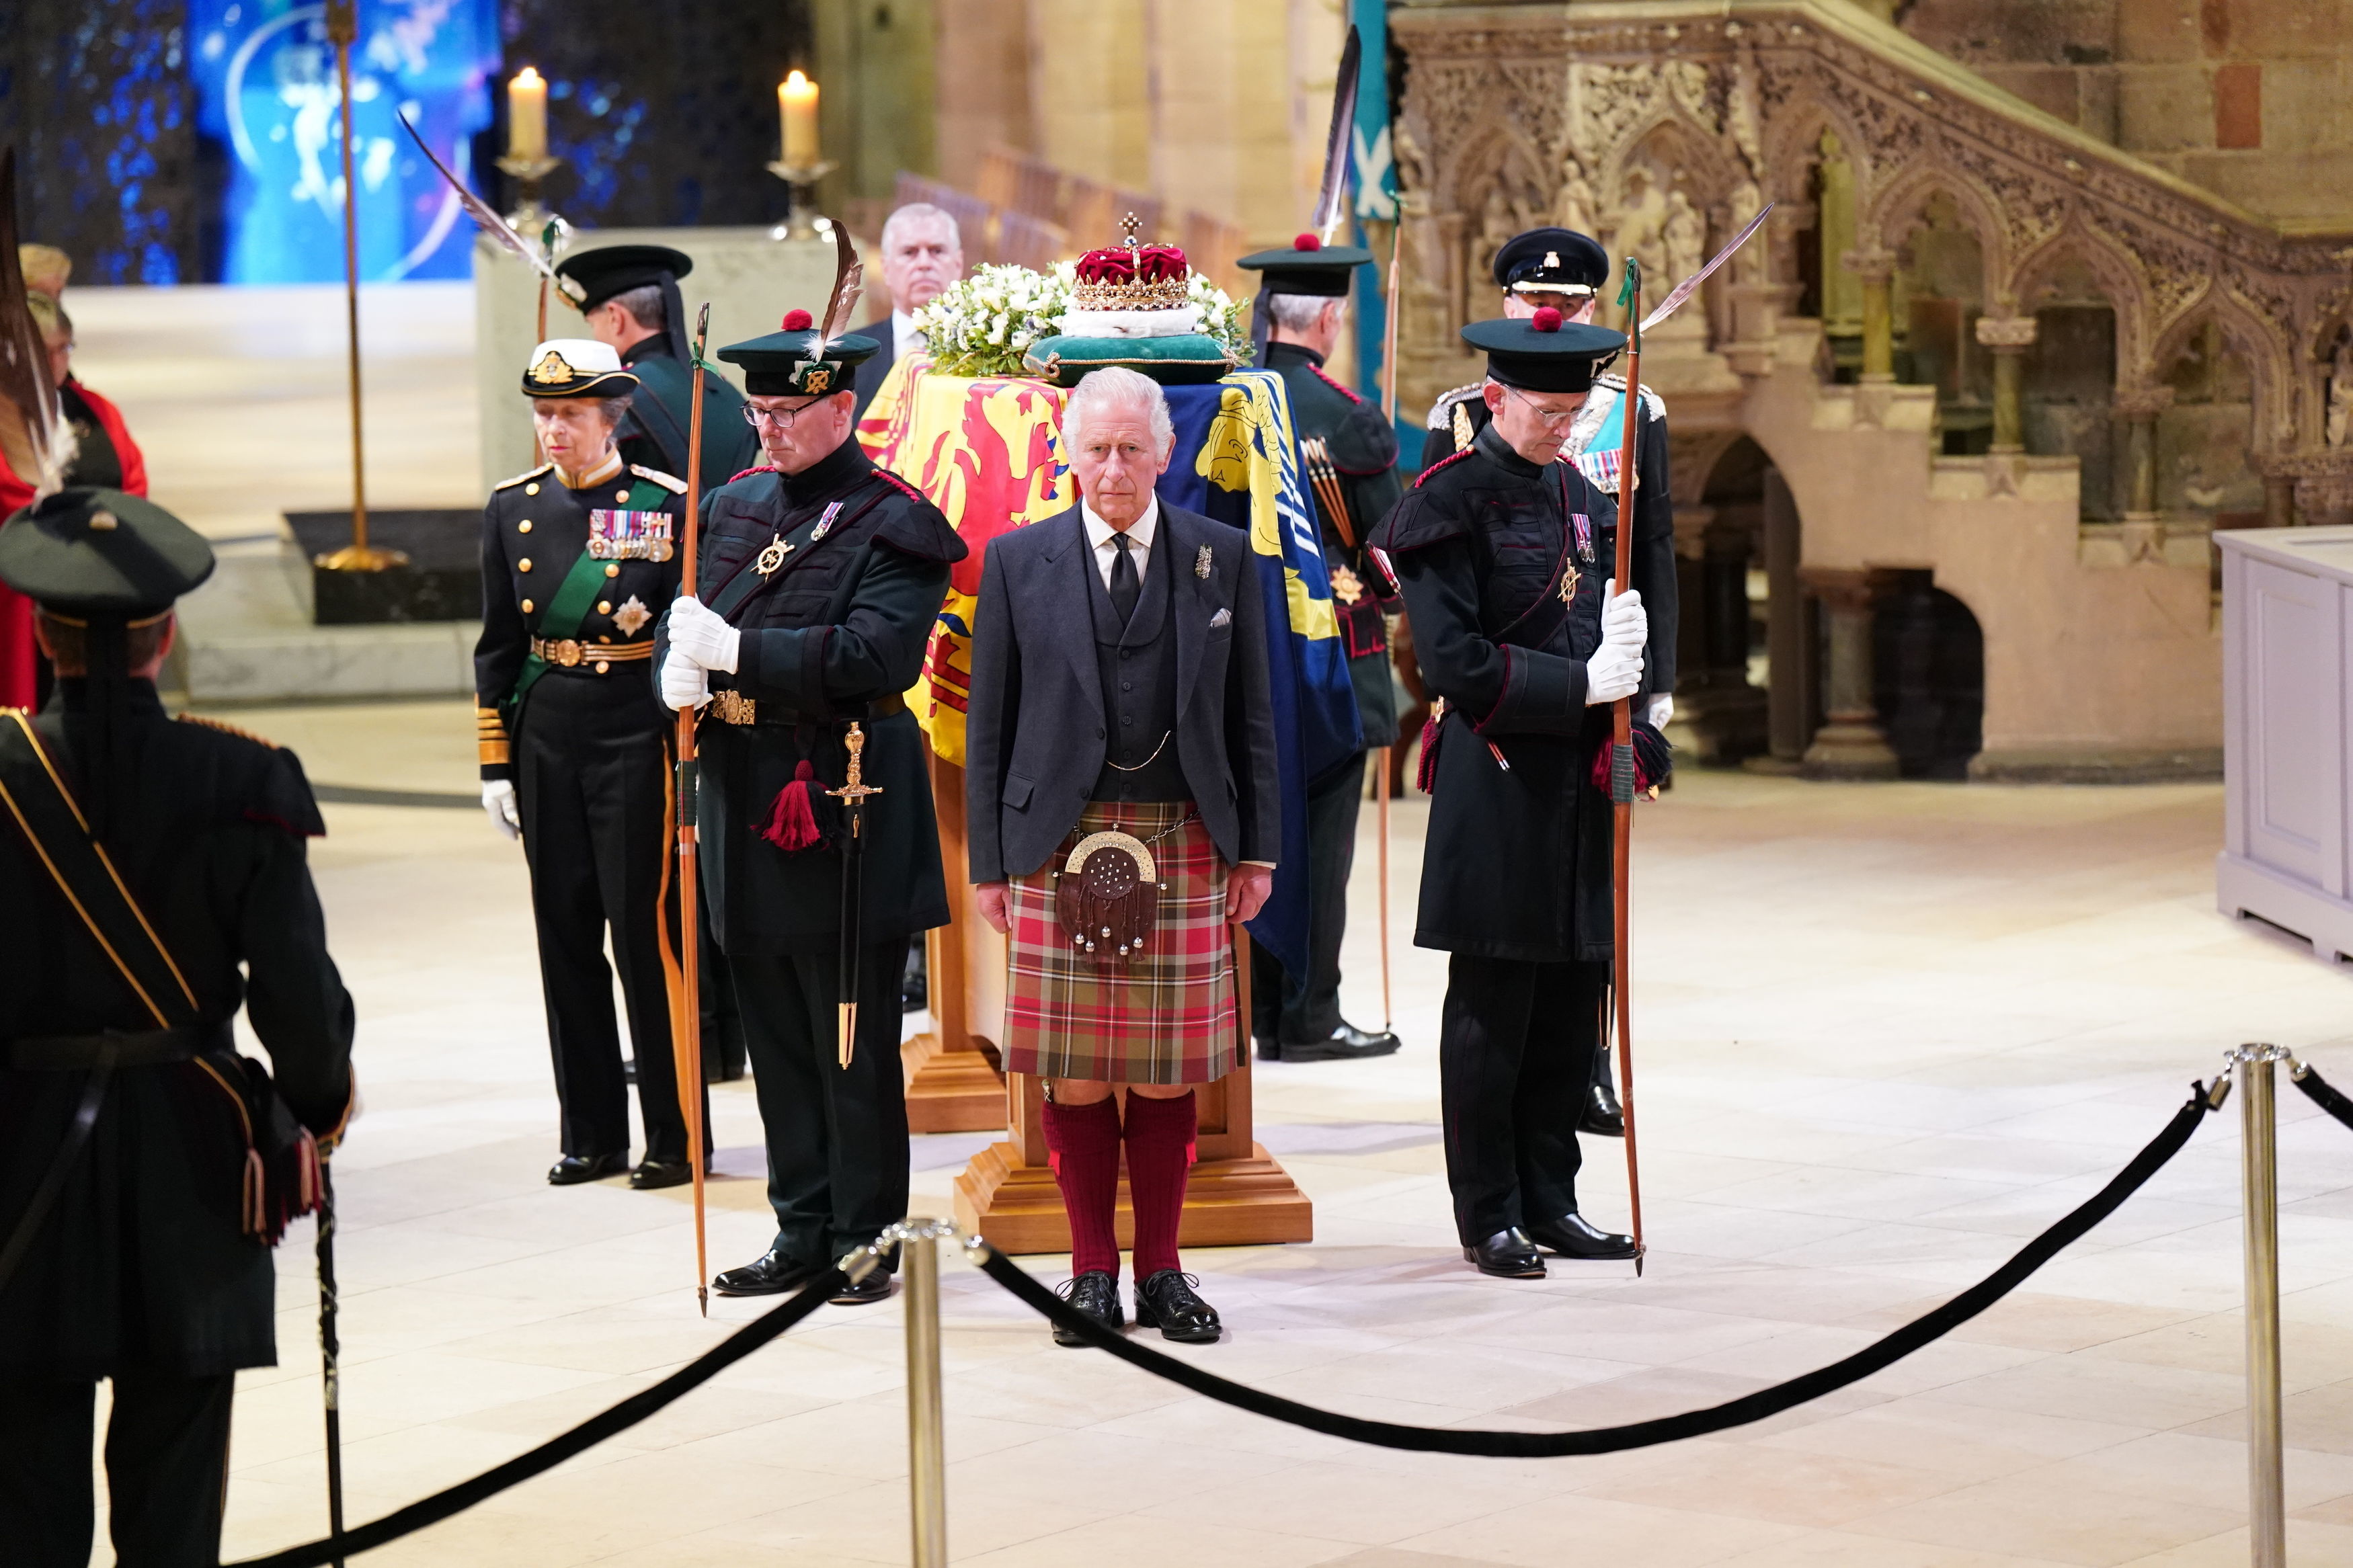 <p>In a ceremony called the Vigil of the Princes, Britain's King Charles III, Princess Anne, Prince Andrew and Prince Edward stood on all four sides of mother Queen Elizabeth II's casket inside St. Giles' Cathedral in Edinburgh, Scotland, on Sept. 12, 2022, for 10 minutes alongside members of the Royal Company of Archers, who were there to guard her body through the night, as thousands of mourners filed past to pay their respects. Andrew, who served 22 years in the Royal Navy, was the only one of his siblings not in uniform -- though he did wear his medals -- as he was stripped of his military titles in early 2022 before settling a civil sexual abuse lawsuit.</p>